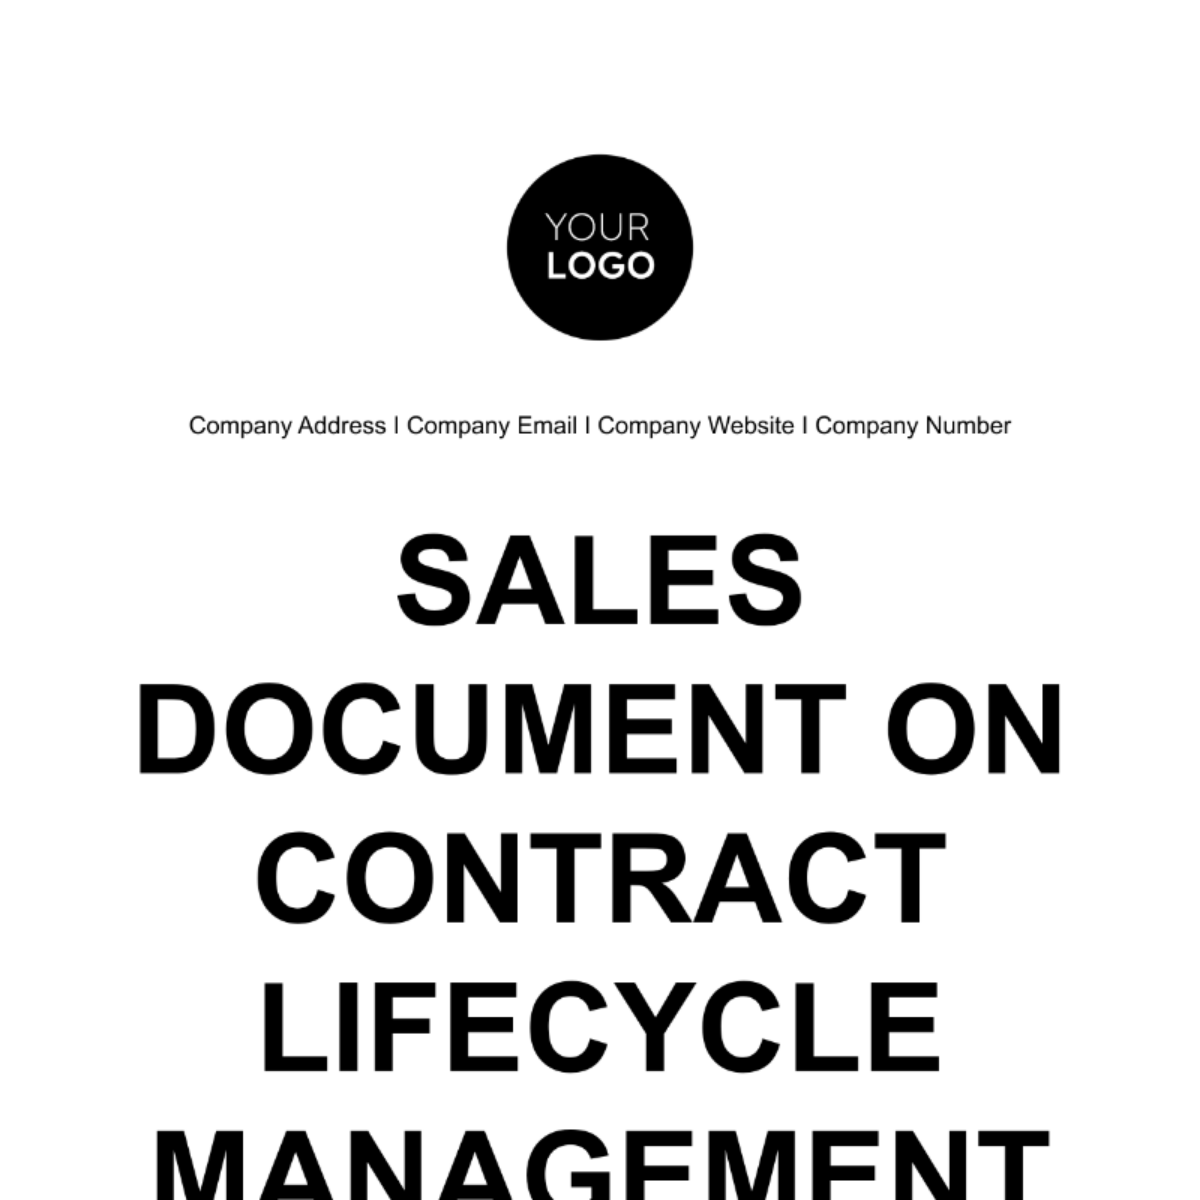 Free Sales Document on Contract Lifecycle Management Template